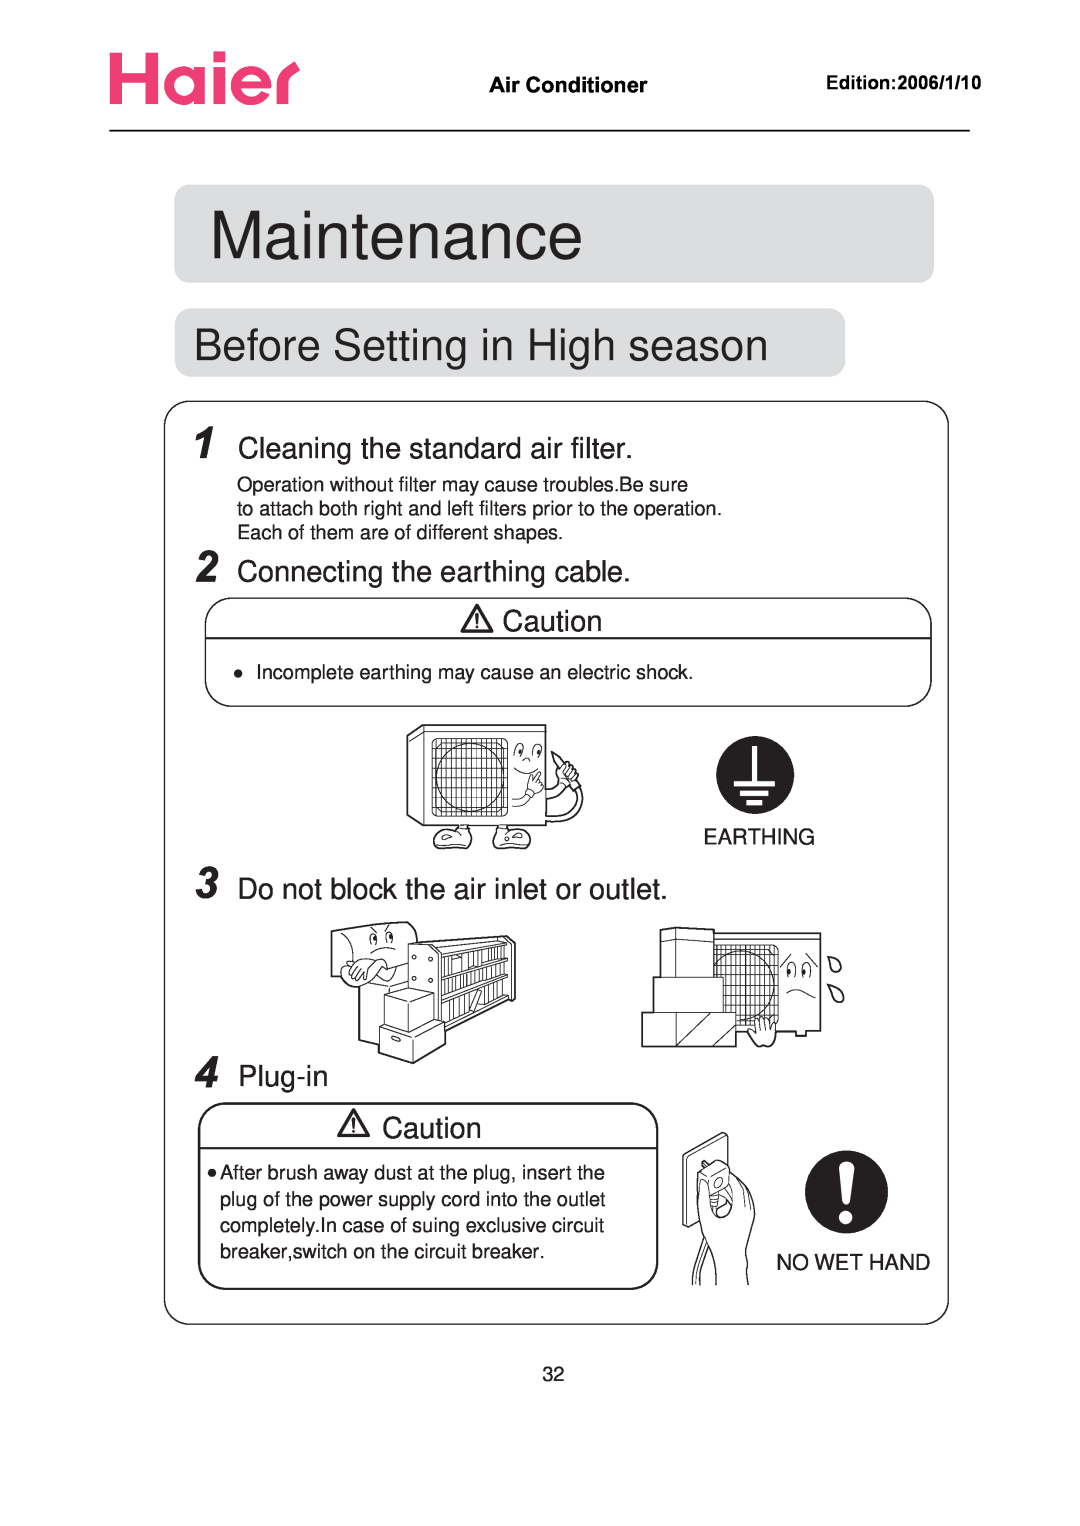 Haier Compact Air Conditioner manual Before Setting in High season, Maintenance, Cleaning the standard air filter, Earthing 